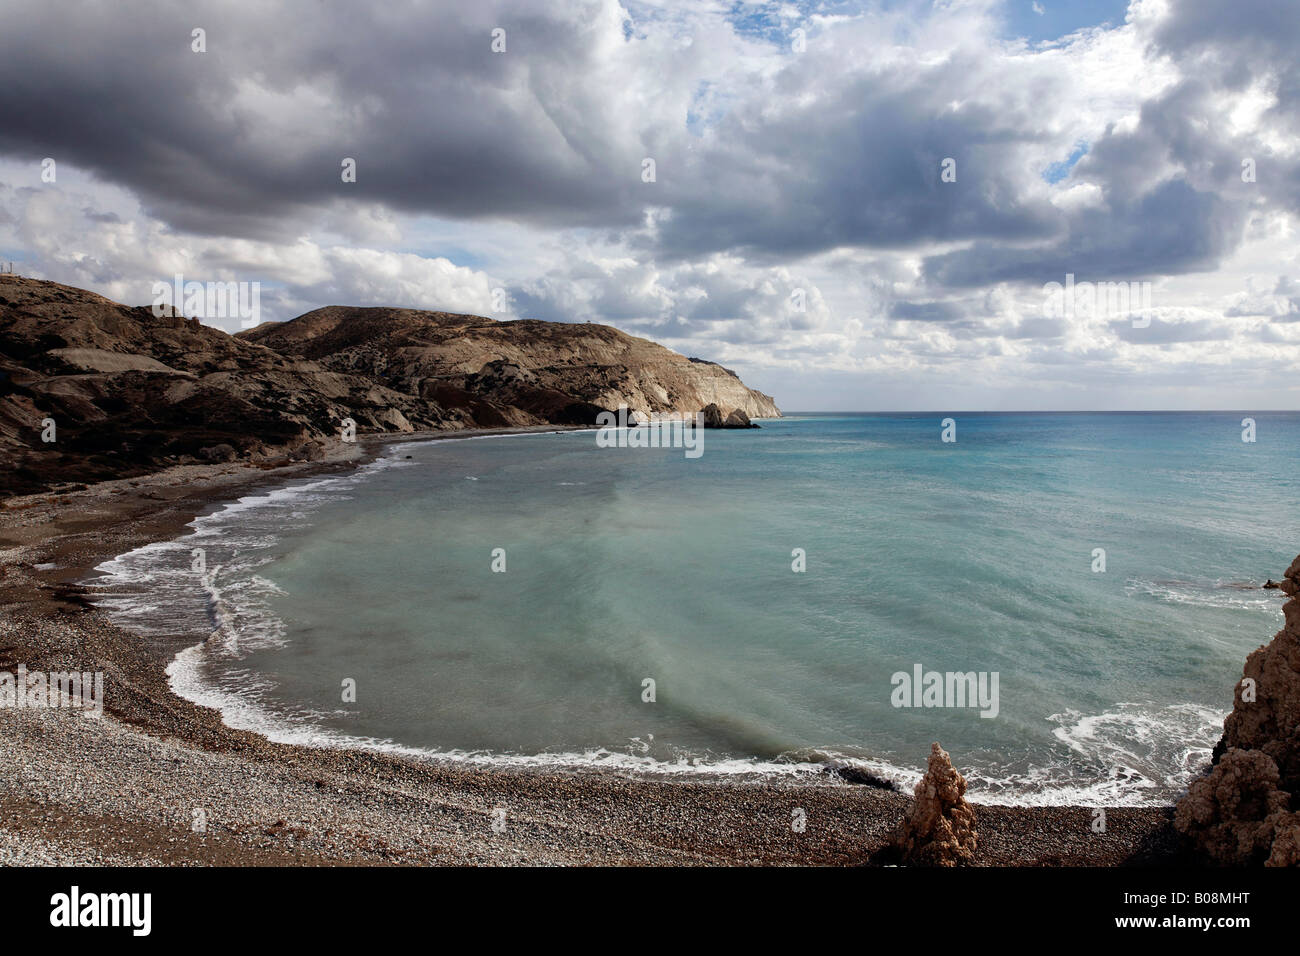 Coastline in the southern, Greek part of Cyprus Stock Photo